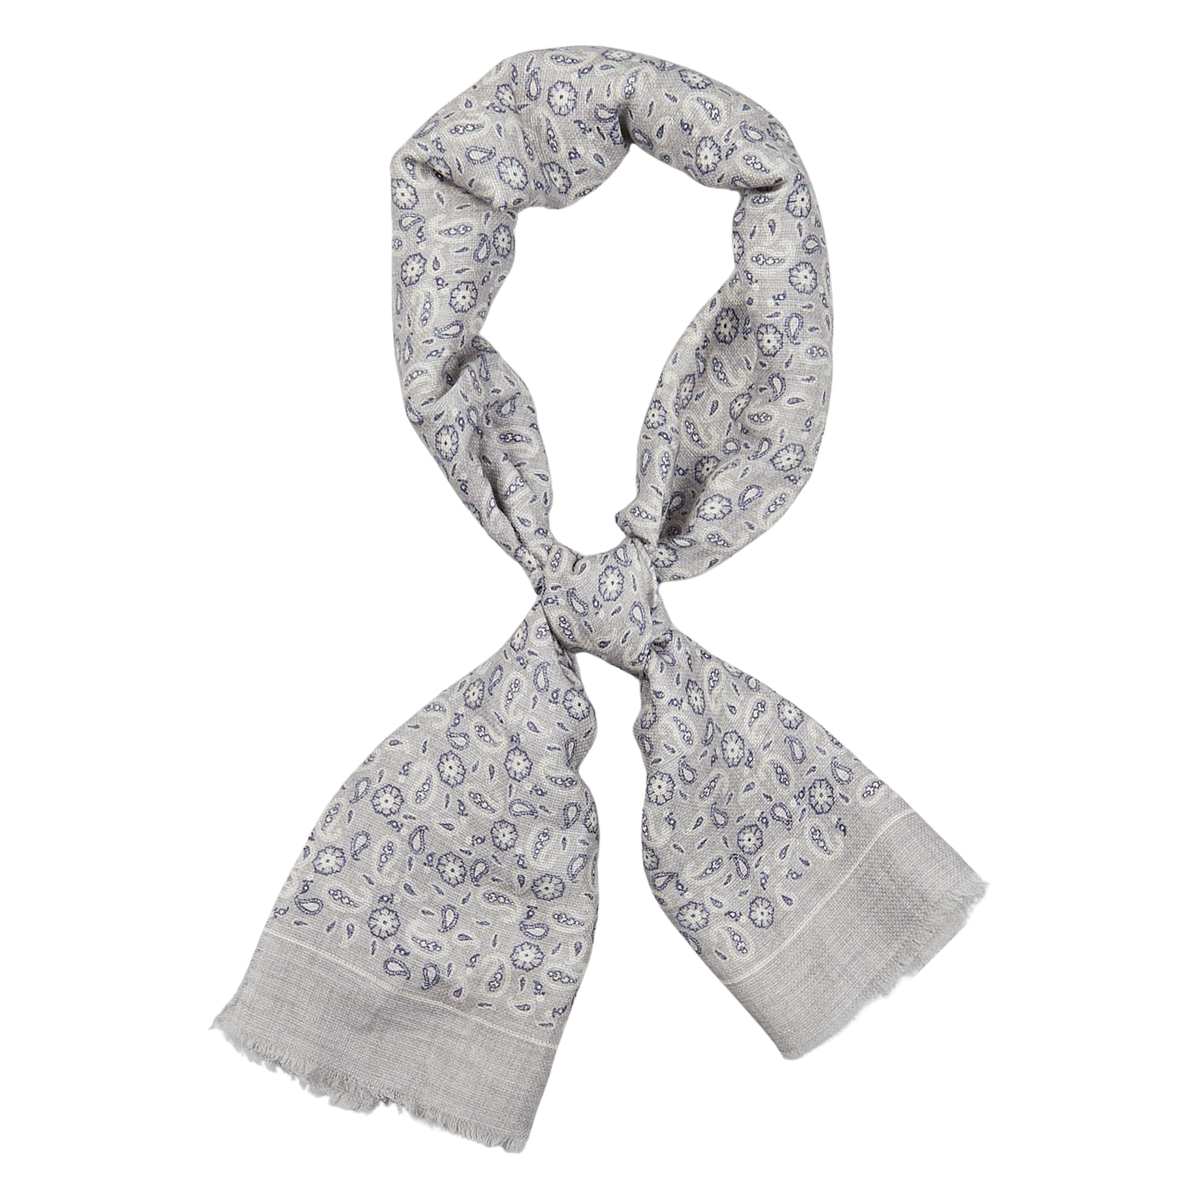 A Grey Paisley Printed Linen Cotton Scarf with a white and purple floral pattern on a white background by Amanda Christensen.